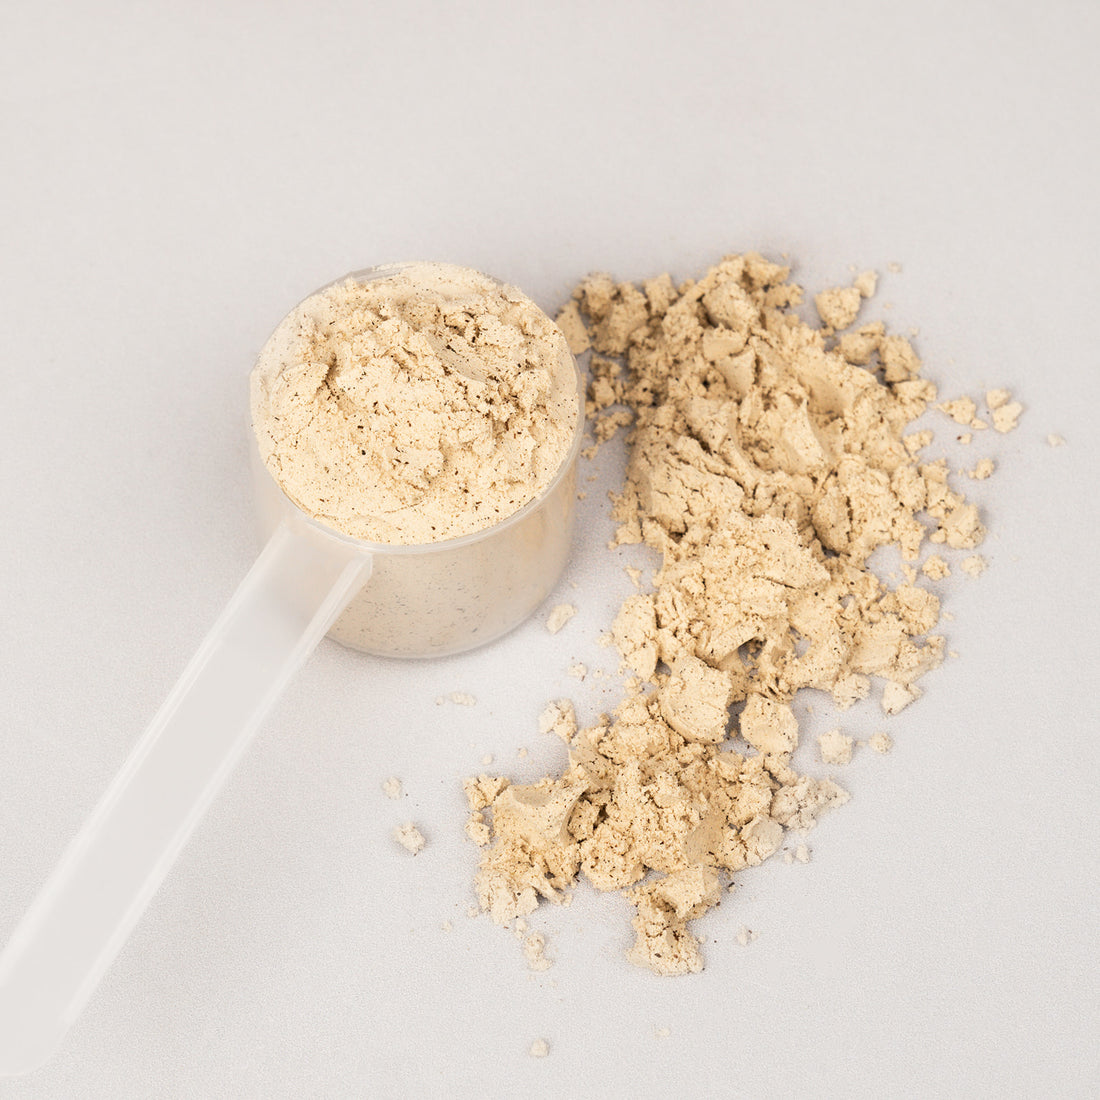 What to look for and what to avoid in protein powder